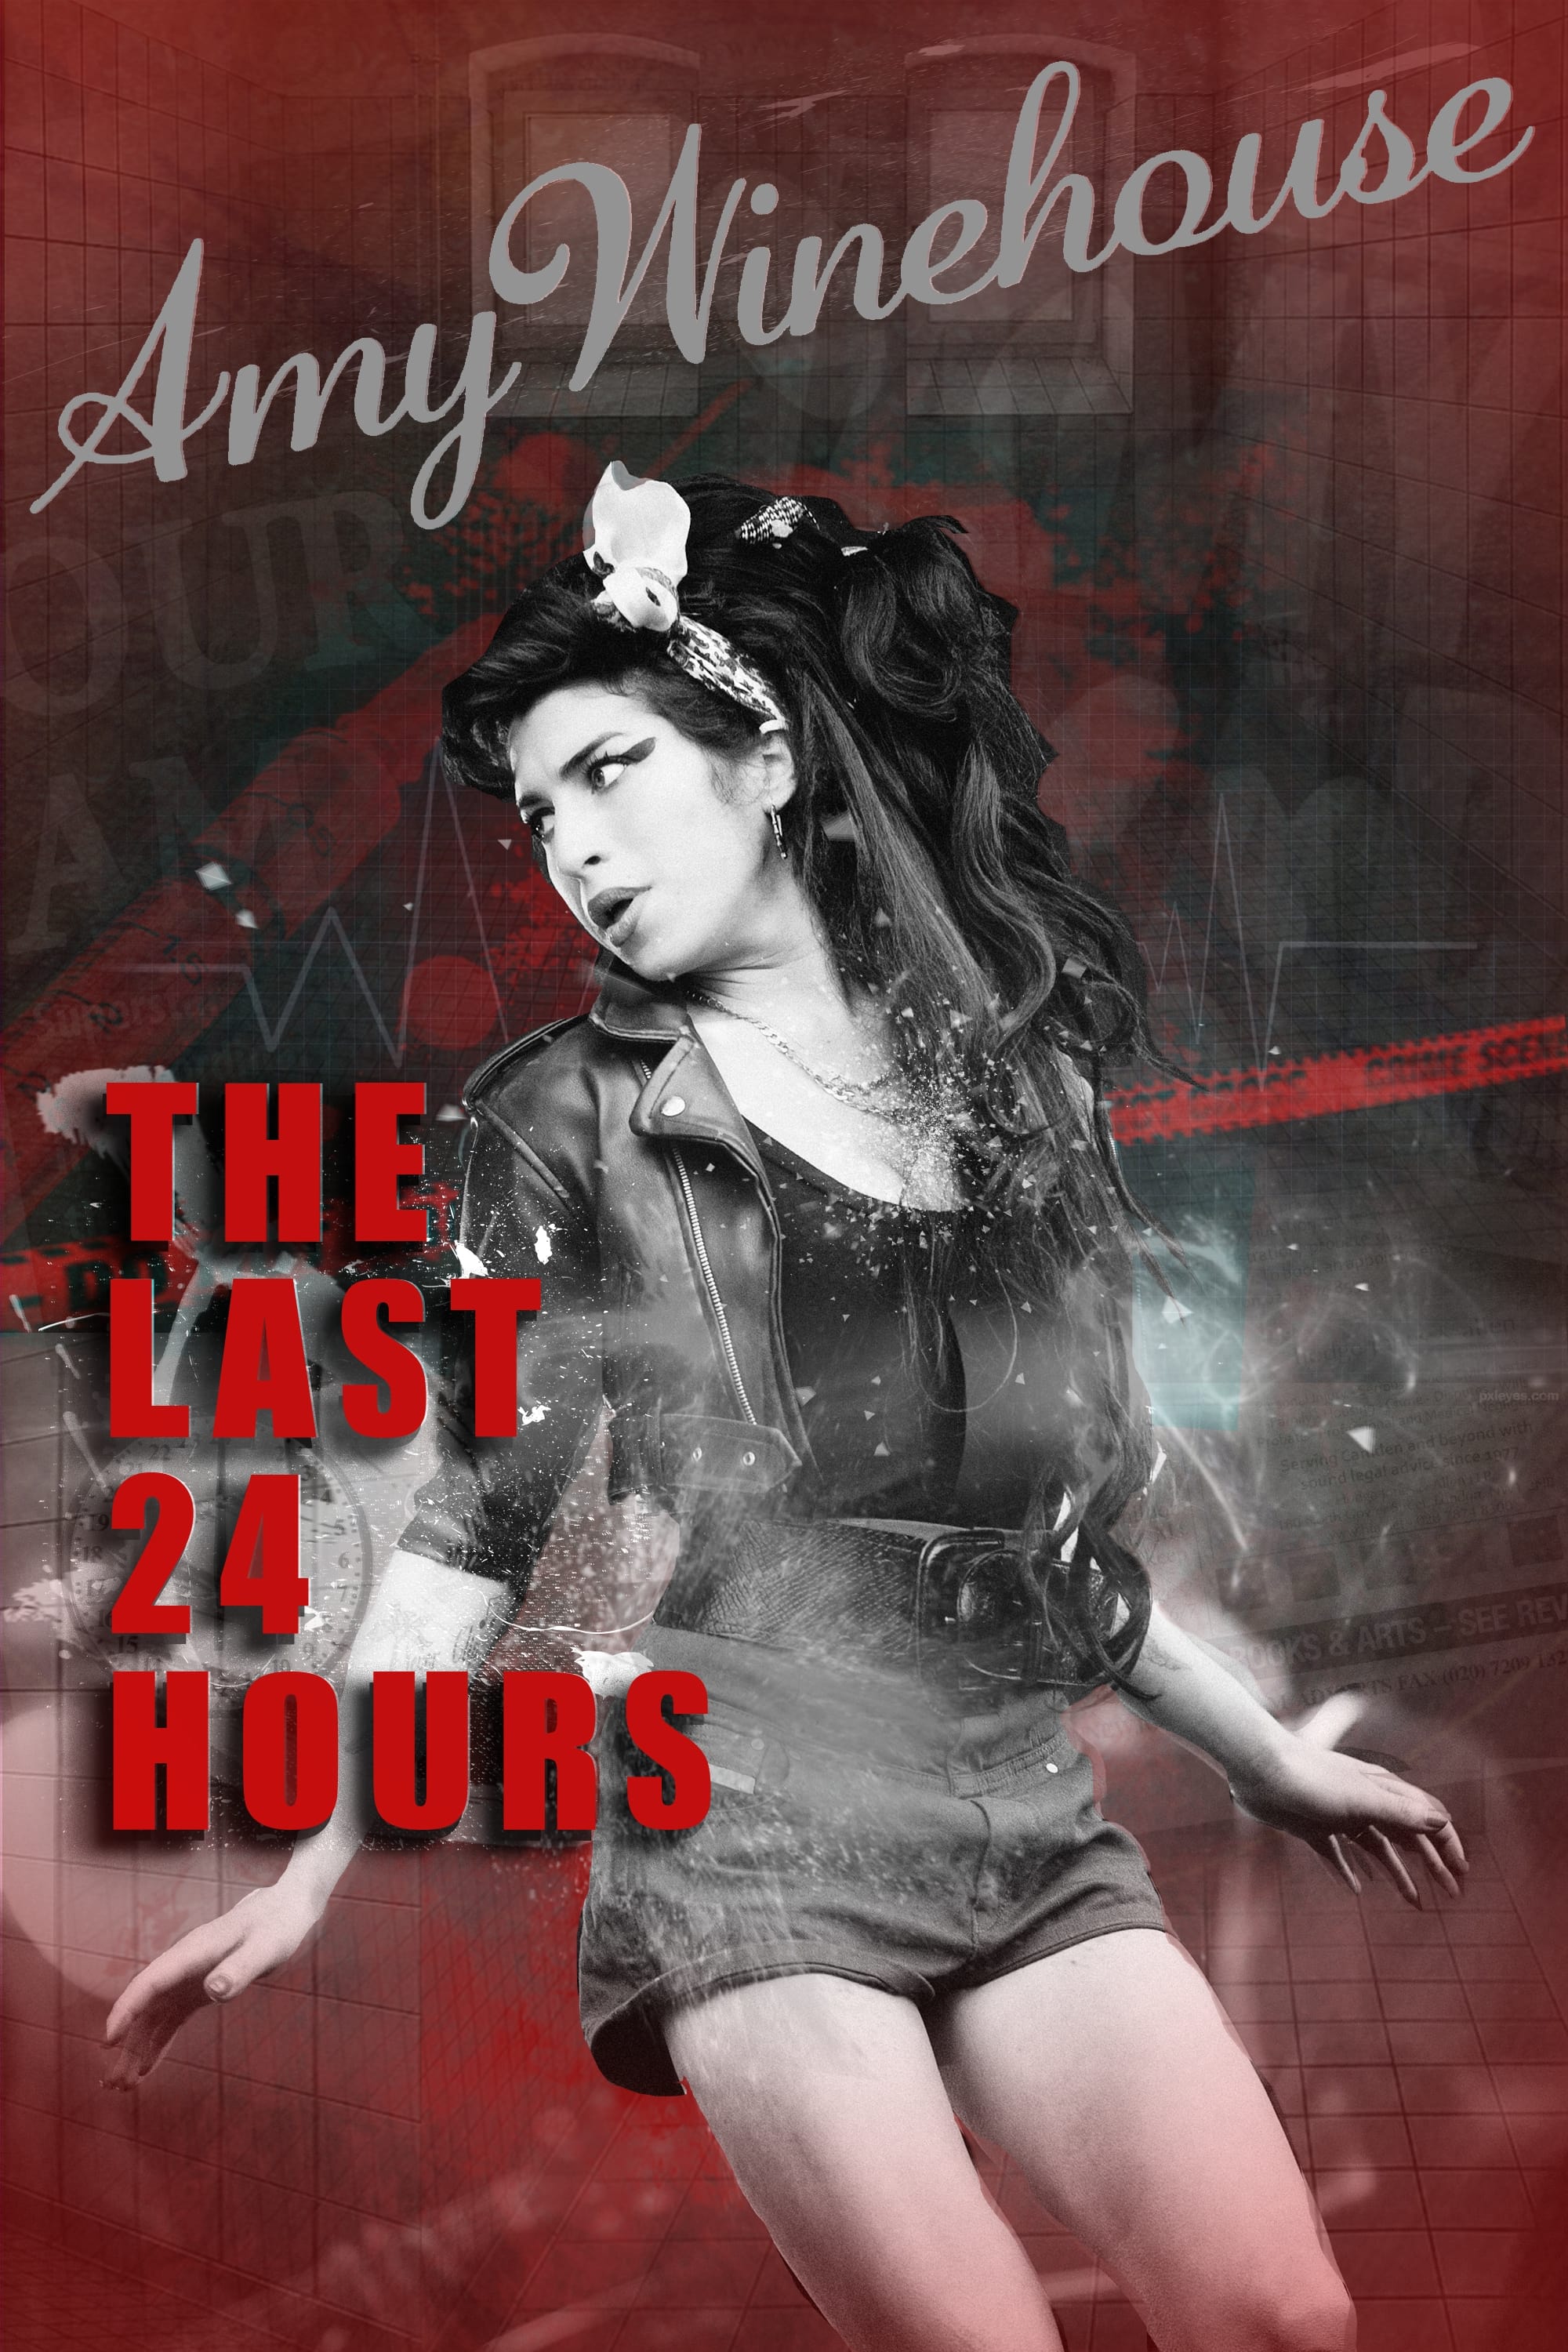 The Last 24 Hours: Amy Winehouse